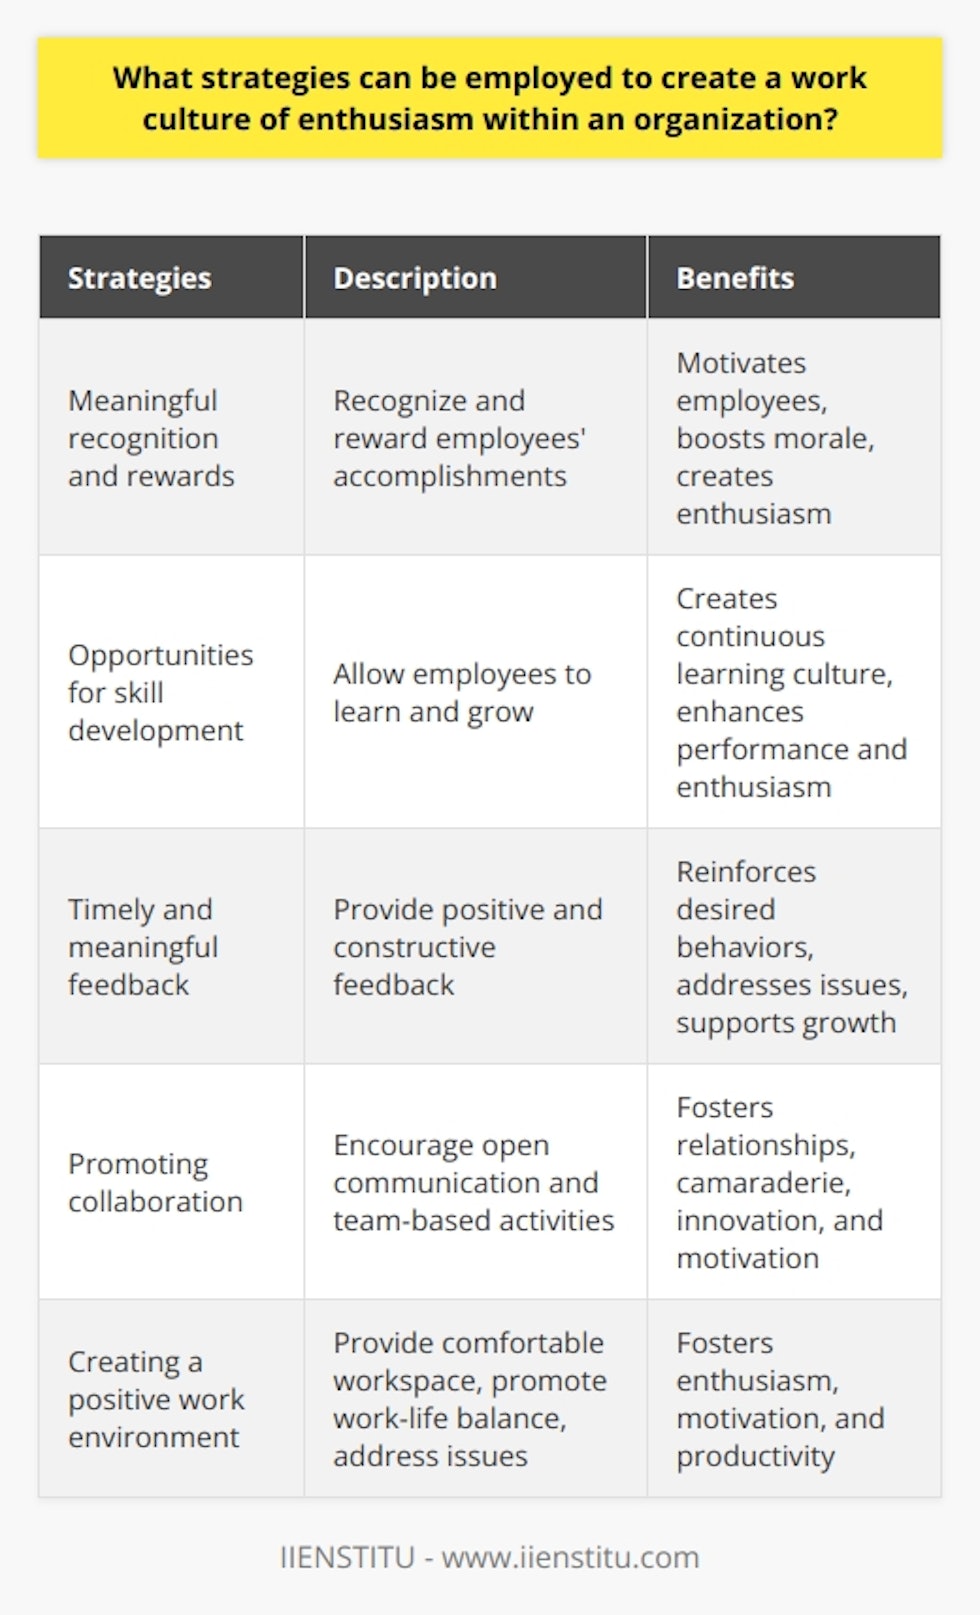 Creating a work culture of enthusiasm within an organization is crucial for fostering a motivated and engaged team. An enthusiastic work environment can positively impact performance, morale, and job satisfaction. To achieve this, organizations can utilize several strategies.One effective strategy is to provide meaningful recognition and rewards for employees' accomplishments. Recognizing employees' hard work and progress not only motivates them but also encourages further engagement in their tasks. Additionally, this approach can boost team morale and create a sense of enthusiasm. It is important for organizations to consider implementing a structured recognition program to ensure consistent and fair recognition for all employees.Another strategy is to offer opportunities for employees to develop their skills and capabilities. By allowing employees to learn and grow, organizations can create an atmosphere of continuous learning and enthusiasm. This can be done through various methods such as training programs, mentoring initiatives, and cross-functional projects. Encouraging employees to develop new skills not only boosts their enthusiasm but also enhances their overall performance and productivity.Providing timely and meaningful feedback is also crucial in creating a work culture of enthusiasm. Employees thrive when they receive both positive and constructive feedback promptly. Positive feedback reinforces desired behaviors and motivates employees to continue performing well. Conversely, constructive feedback helps address any issues that may be hindering employees' performance and motivation. Organizations should establish a feedback culture where managers and peers provide regular feedback to support and encourage growth.Promoting collaboration within the workplace is another effective strategy. Encouraging open communication, facilitating brainstorming sessions, and organizing team-building activities can foster relationships, camaraderie, and a culture of enthusiasm. When employees work together, they feel more engaged, motivated, and supported. Collaboration also promotes knowledge-sharing and idea generation, leading to innovative solutions and improved performance.Lastly, organizations should strive to create a positive work environment. This includes providing a comfortable and pleasant workspace, promoting work-life balance, and addressing any issues that may affect the work environment. A positive work environment plays a significant role in fostering enthusiasm, motivation, and team spirit. When employees feel valued, supported, and well-taken care of, they are more likely to be enthusiastic and productive.In conclusion, organizations can employ various strategies to create a work culture of enthusiasm. These include providing meaningful recognition and rewards, offering development opportunities, providing timely feedback, promoting collaboration, and creating a positive work environment. By implementing these strategies, organizations can foster an atmosphere of enthusiasm, motivation, and productivity.